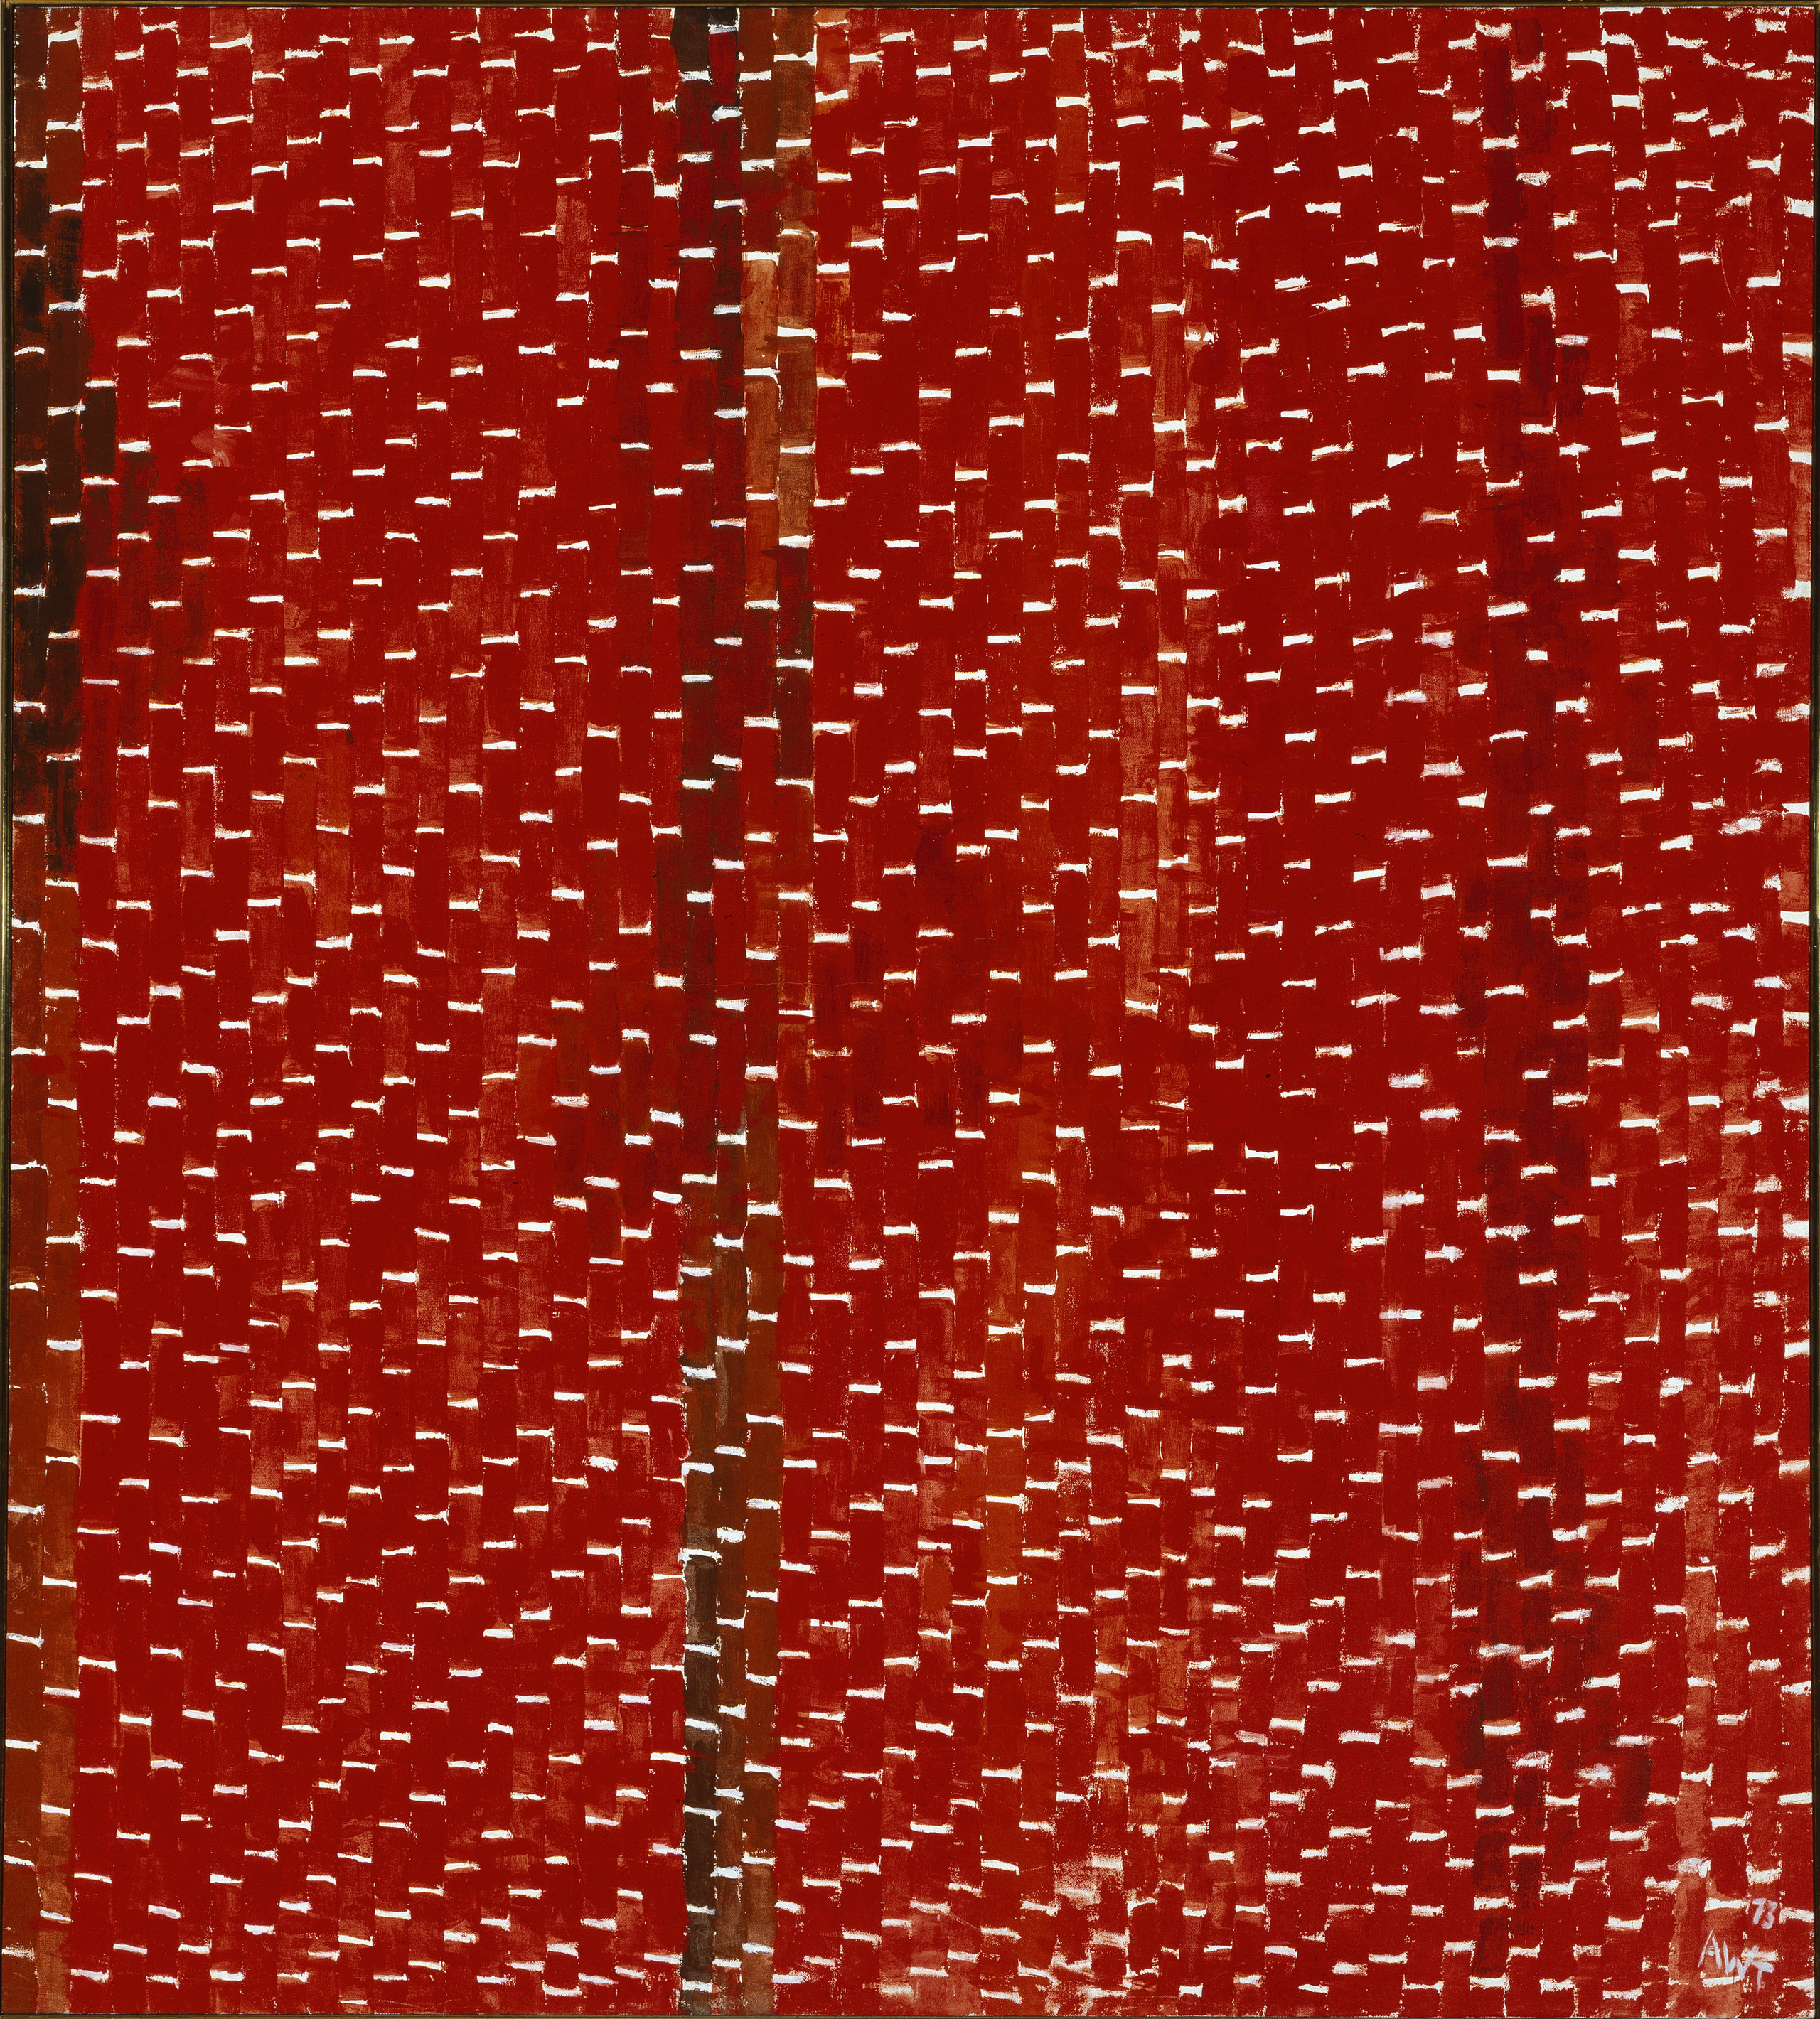 Painting features vertical tile-shaped brushstrokes in various shades of red separated by horizontal white lines. Creating a rhythmic and mosaic-like pattern that resembles stitching, the white lines create stair steps in the lower right corner, separating as they move towards the center.